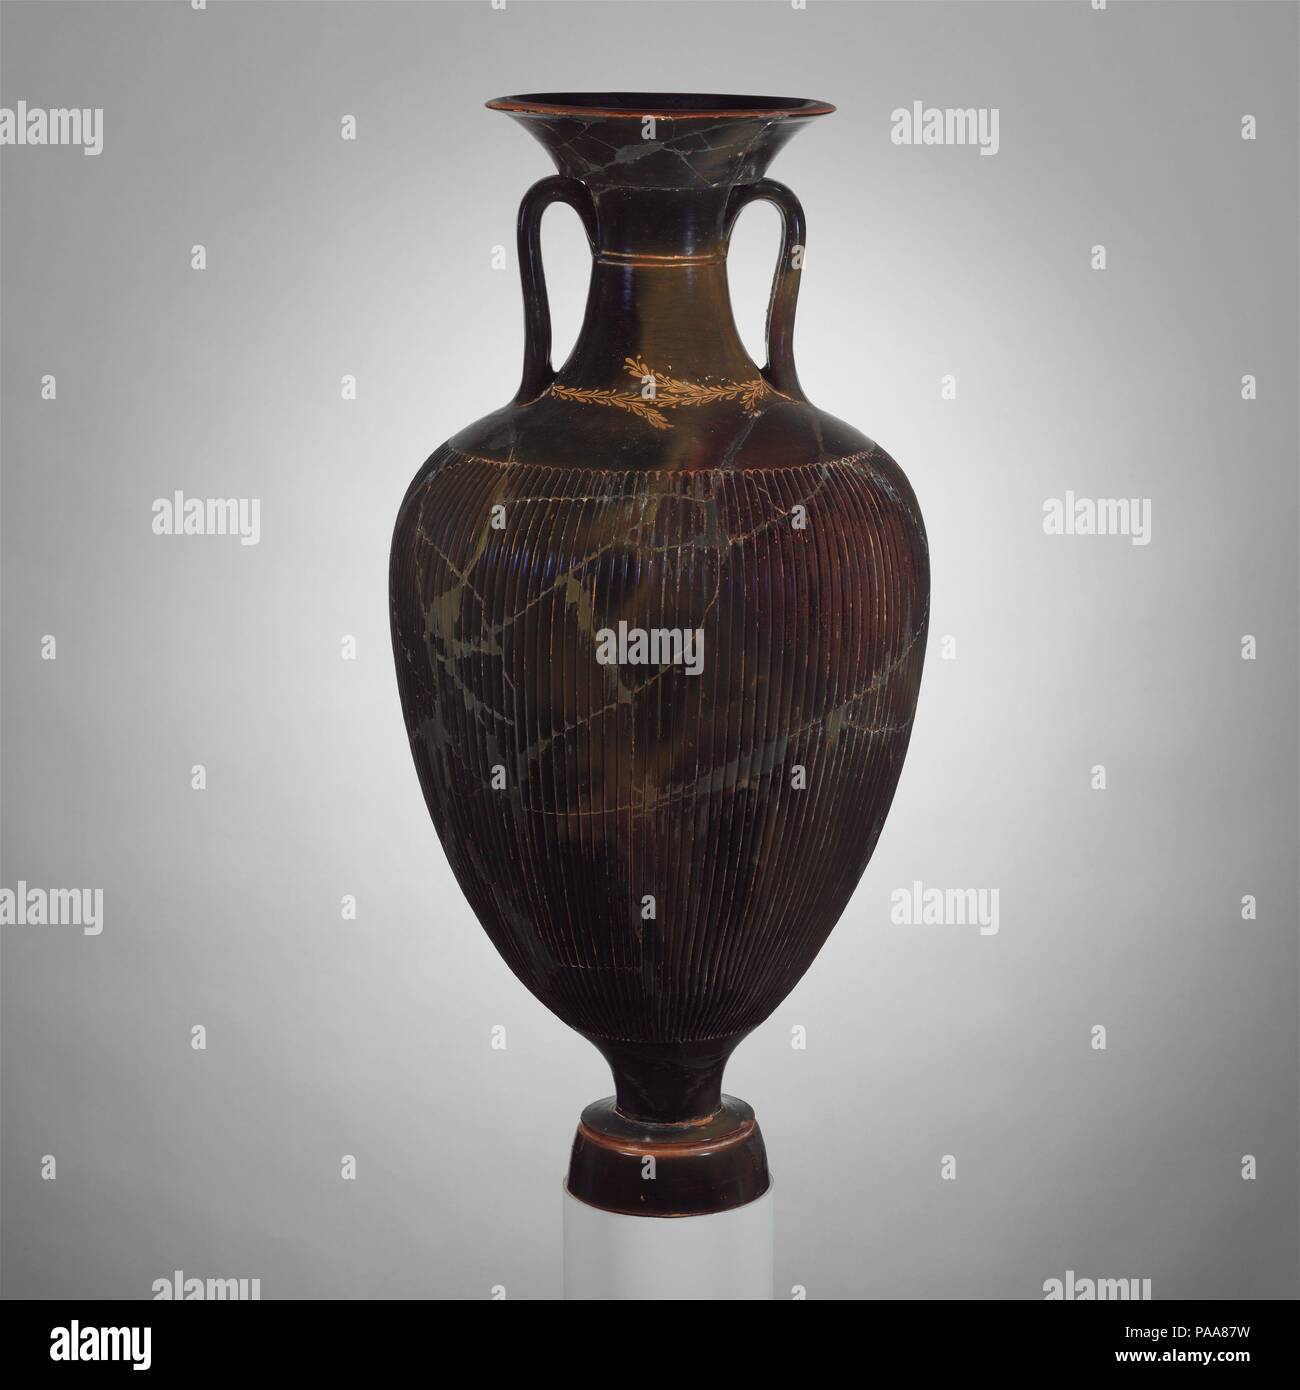 Greek 4th Century Bc Vase High Resolution Stock Photography and Images -  Alamy